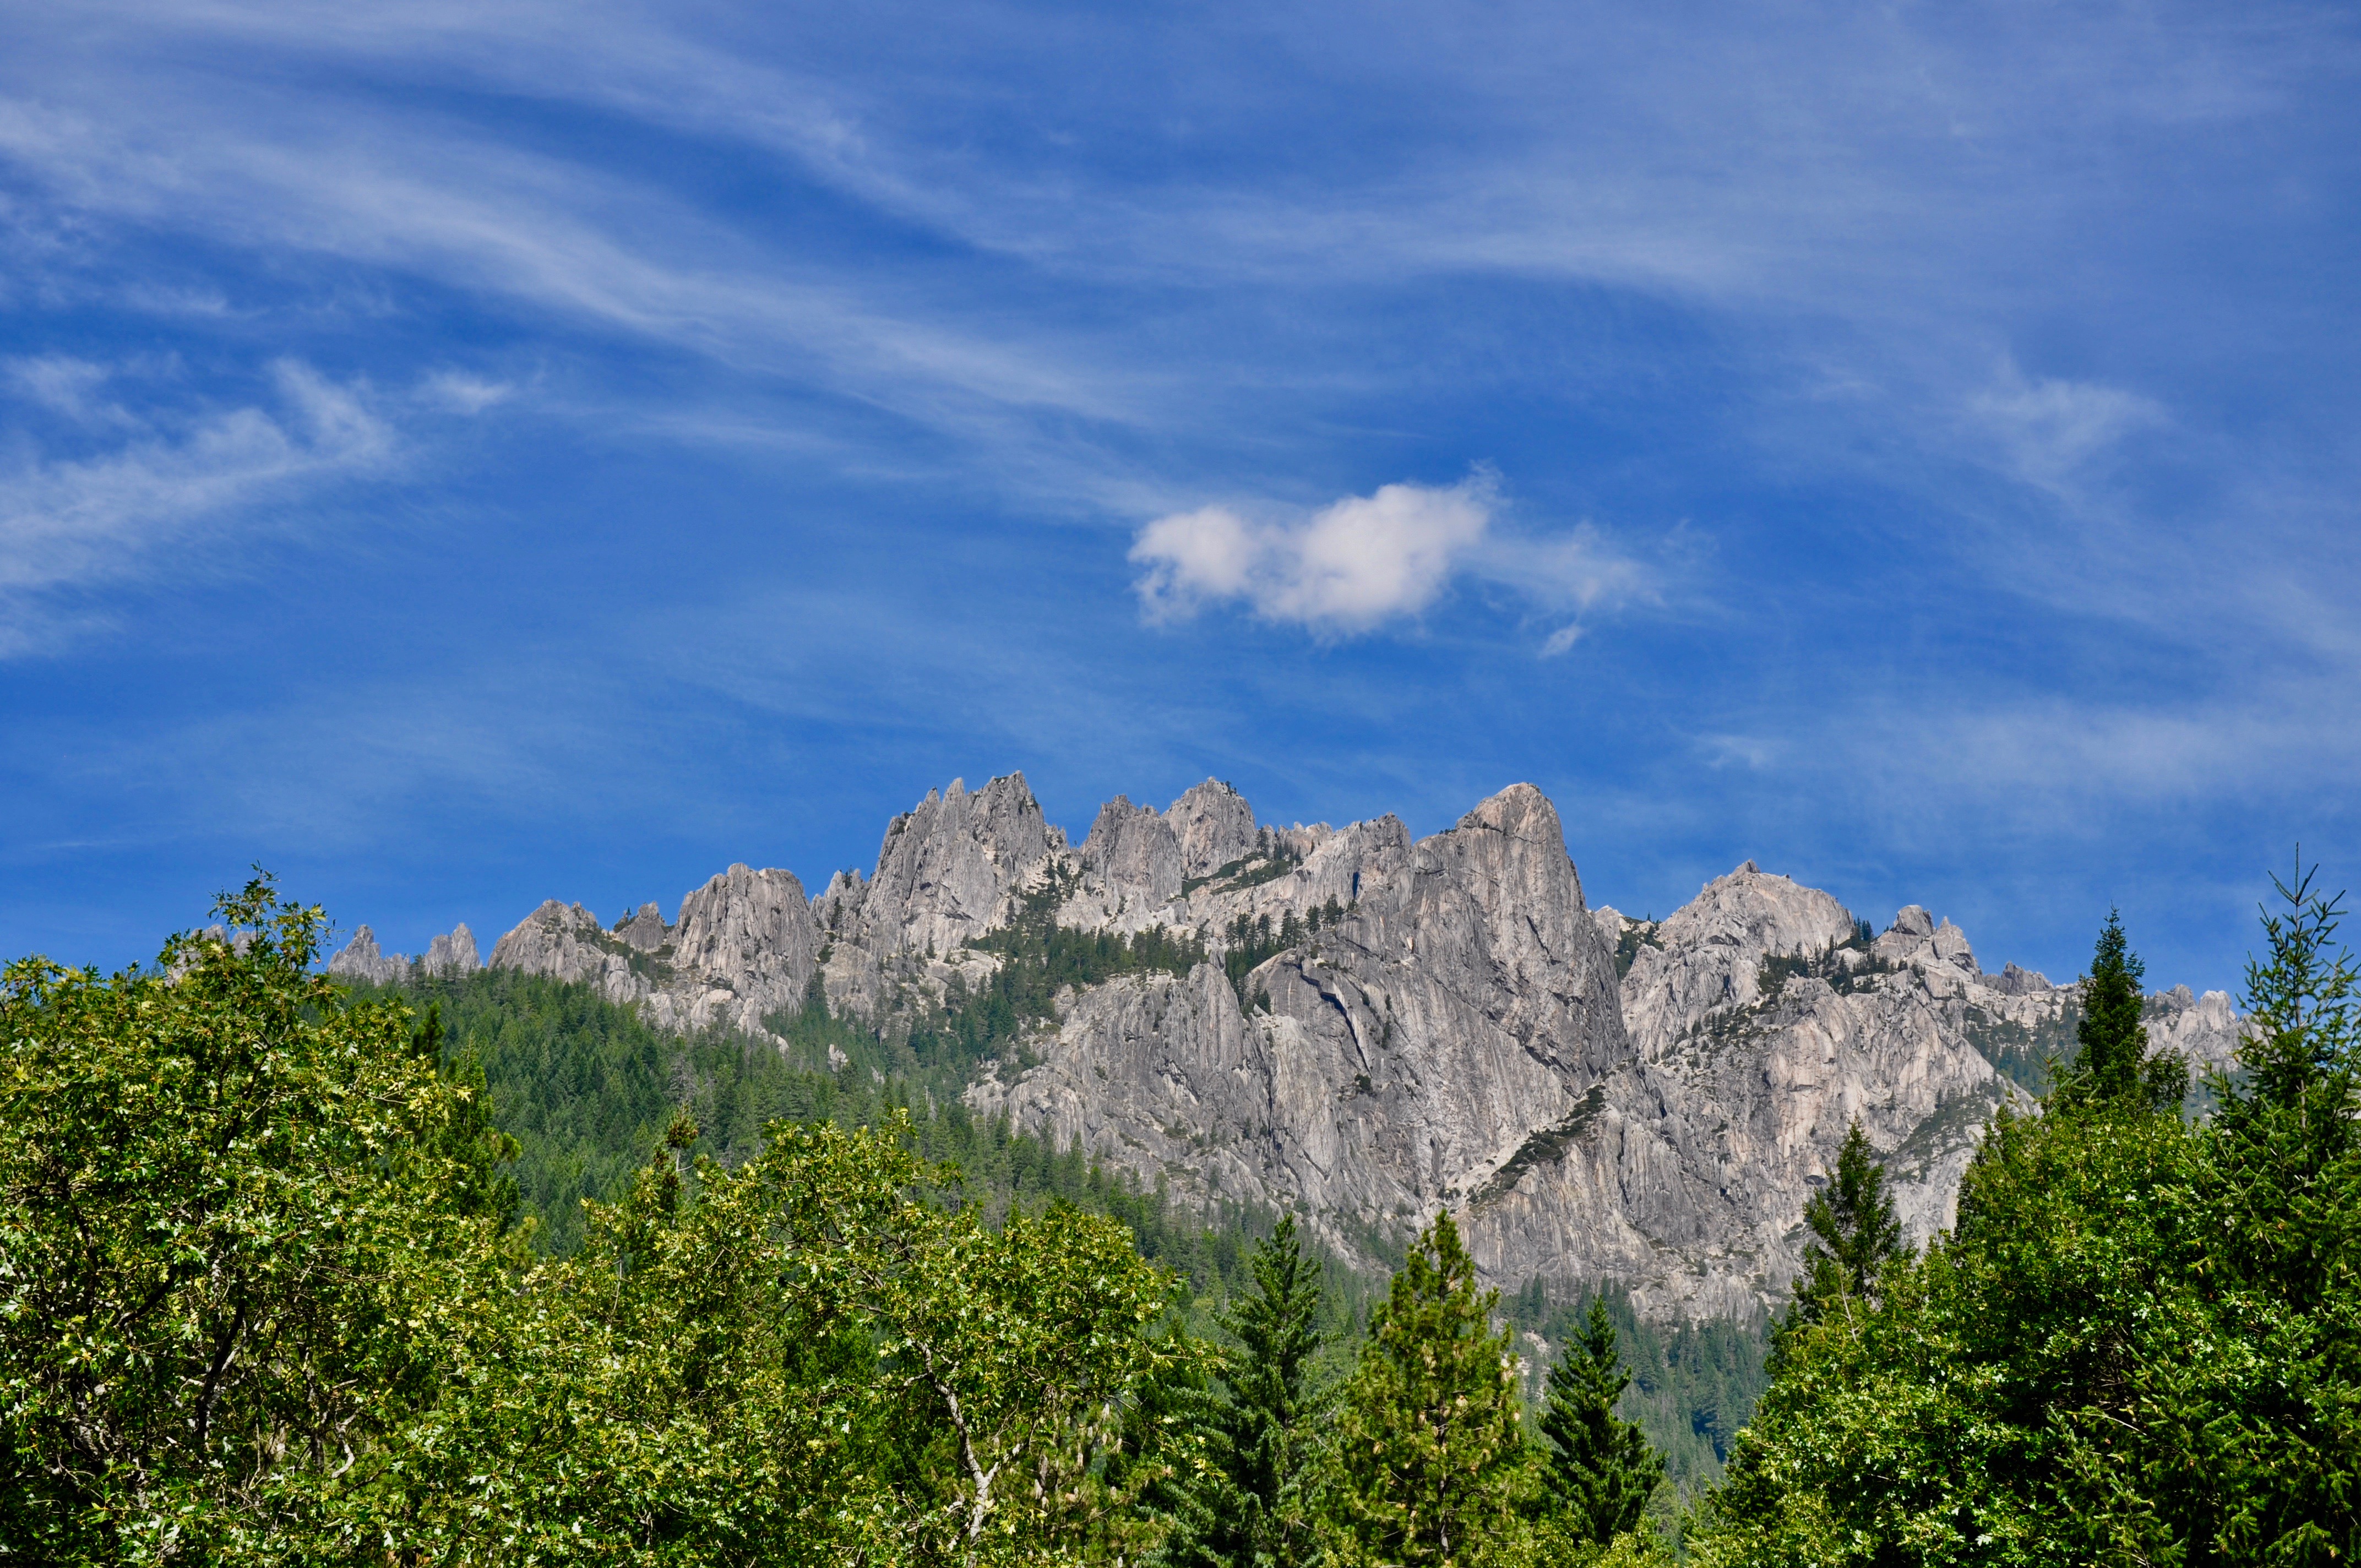 View of Castle Crags near Dunsmuir, California